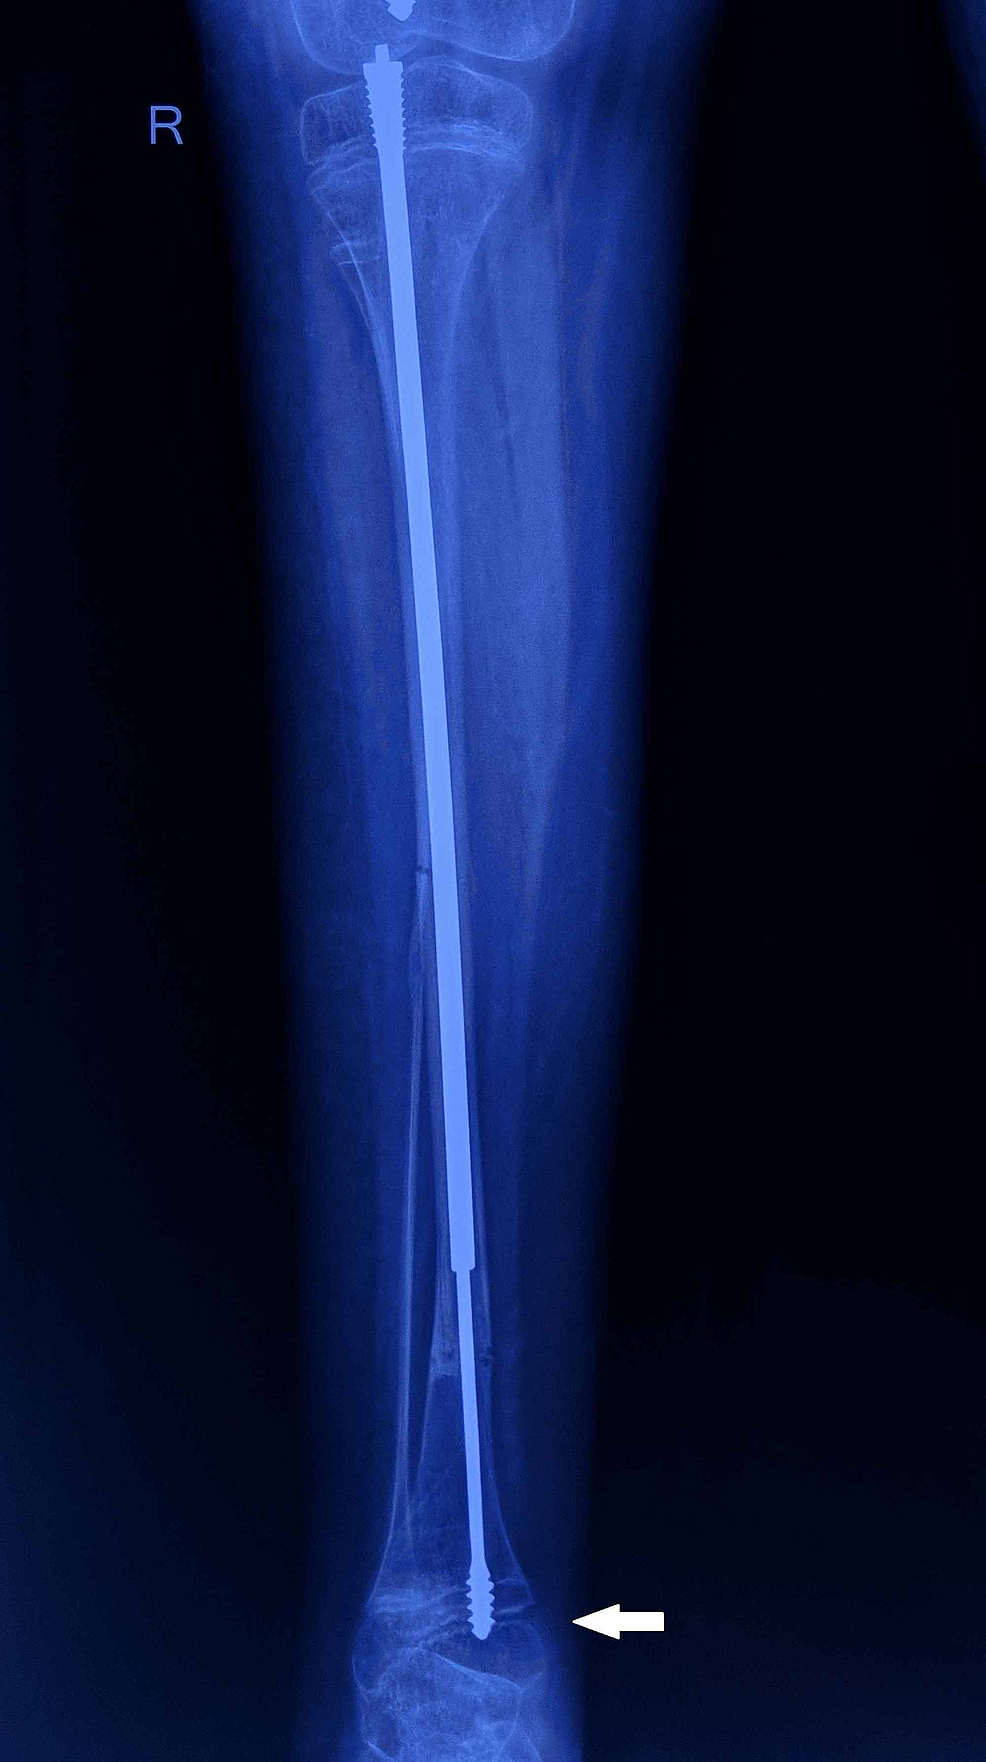 Follow-up-radiograph-of-the-right-tibia